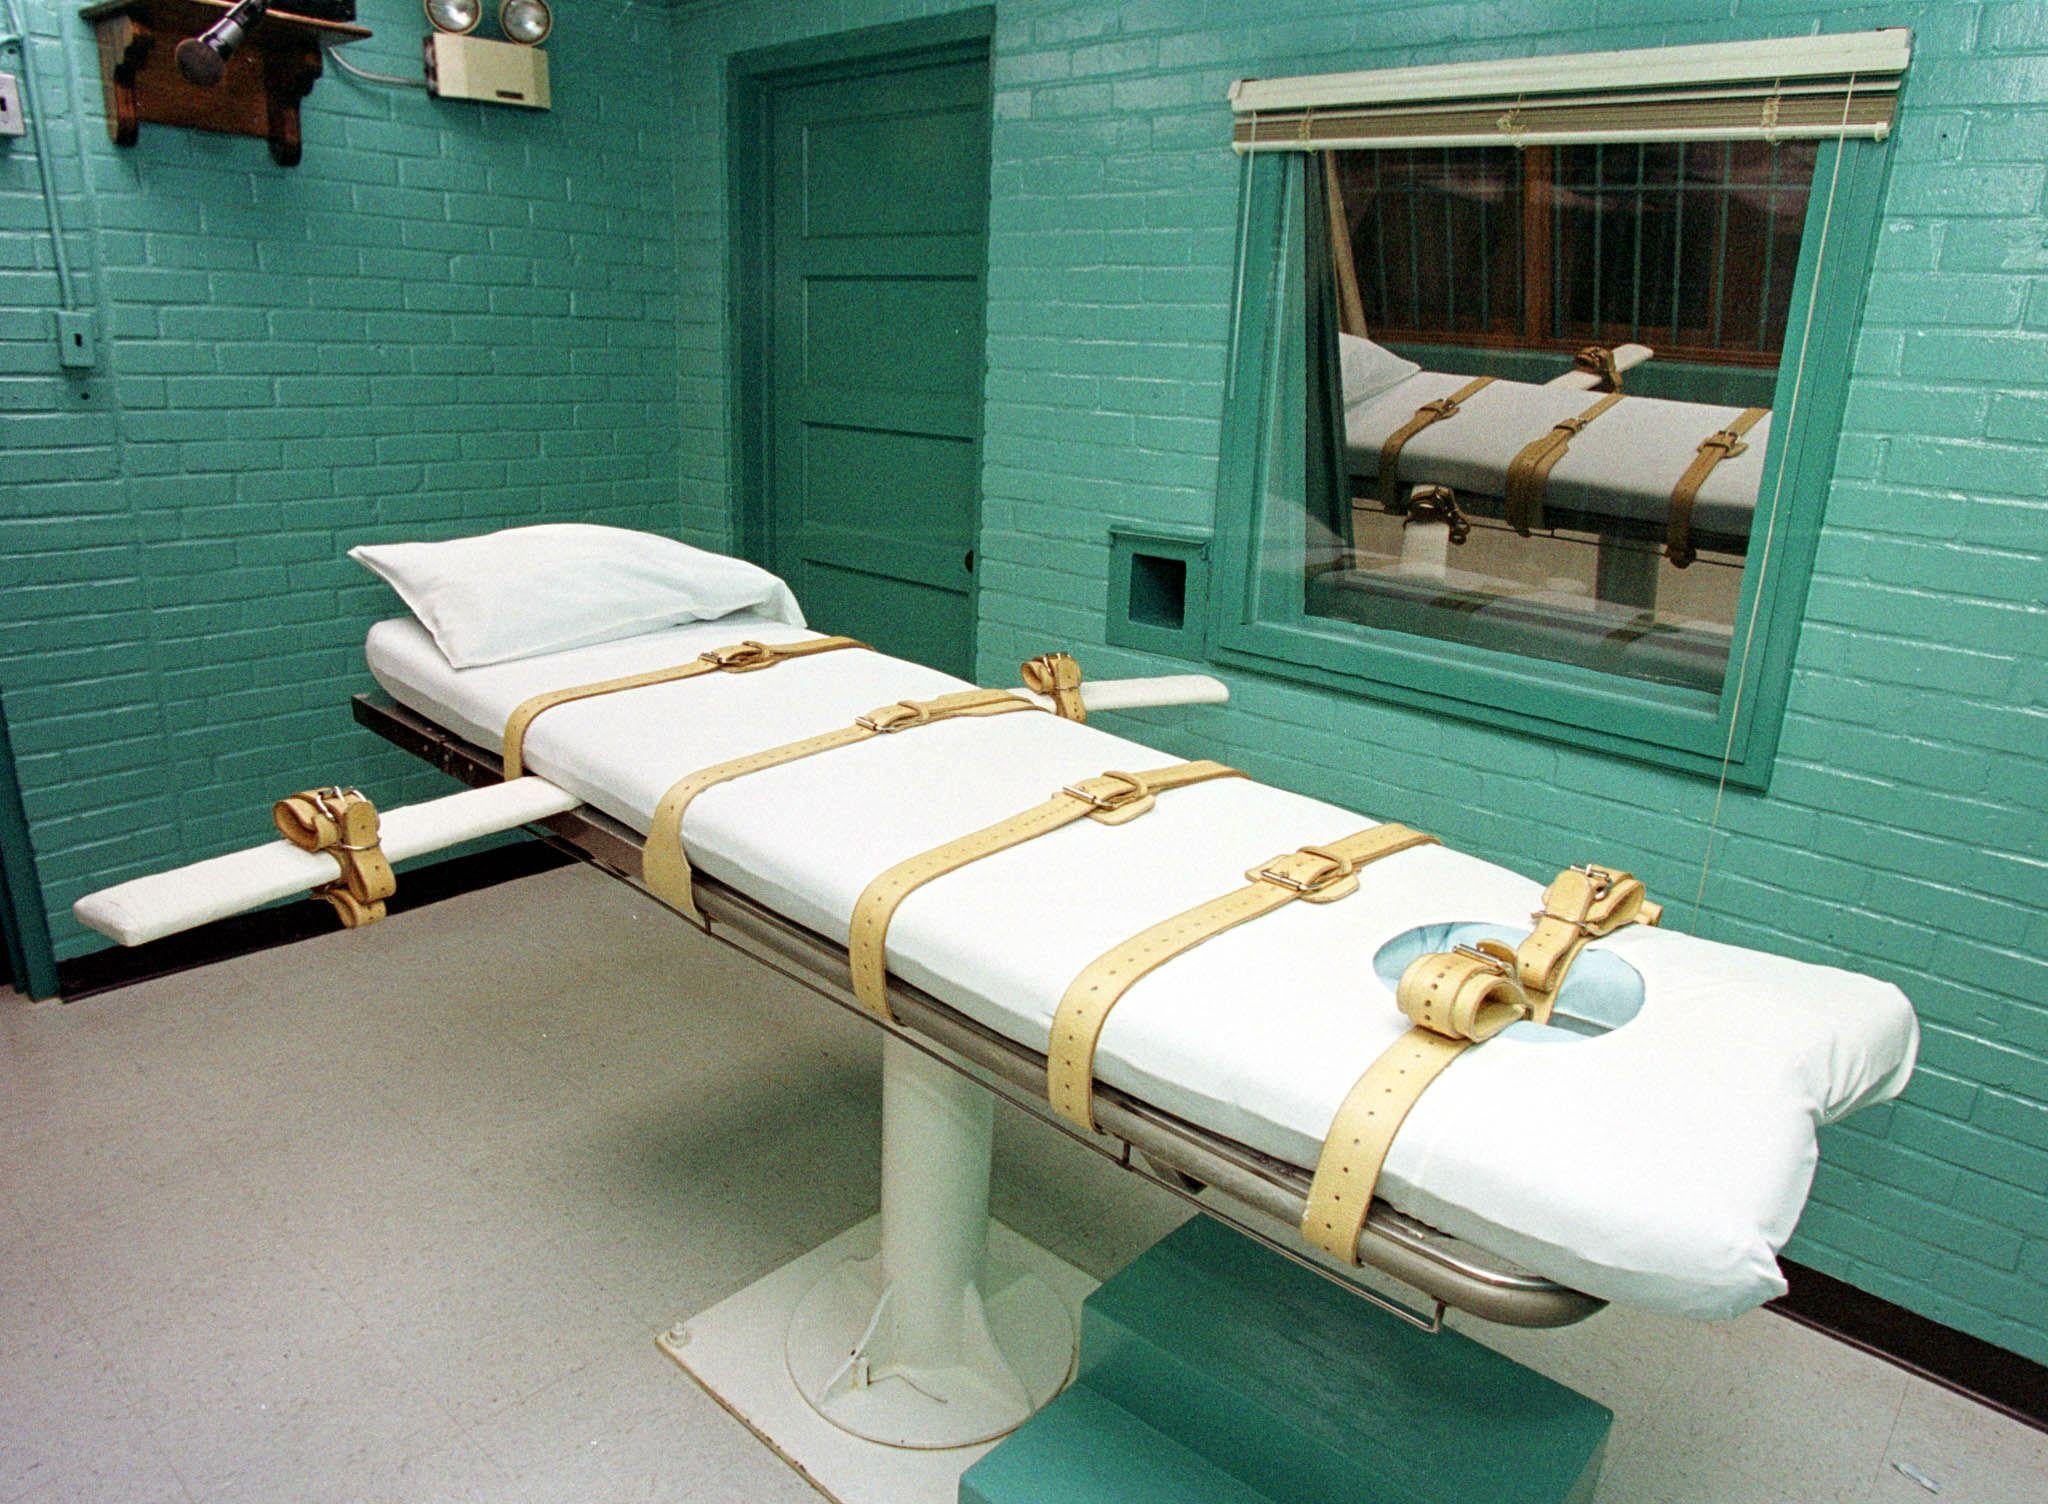 Executions in Ohio have been stayed after the drugs used to administer lethal injections were challenged in court